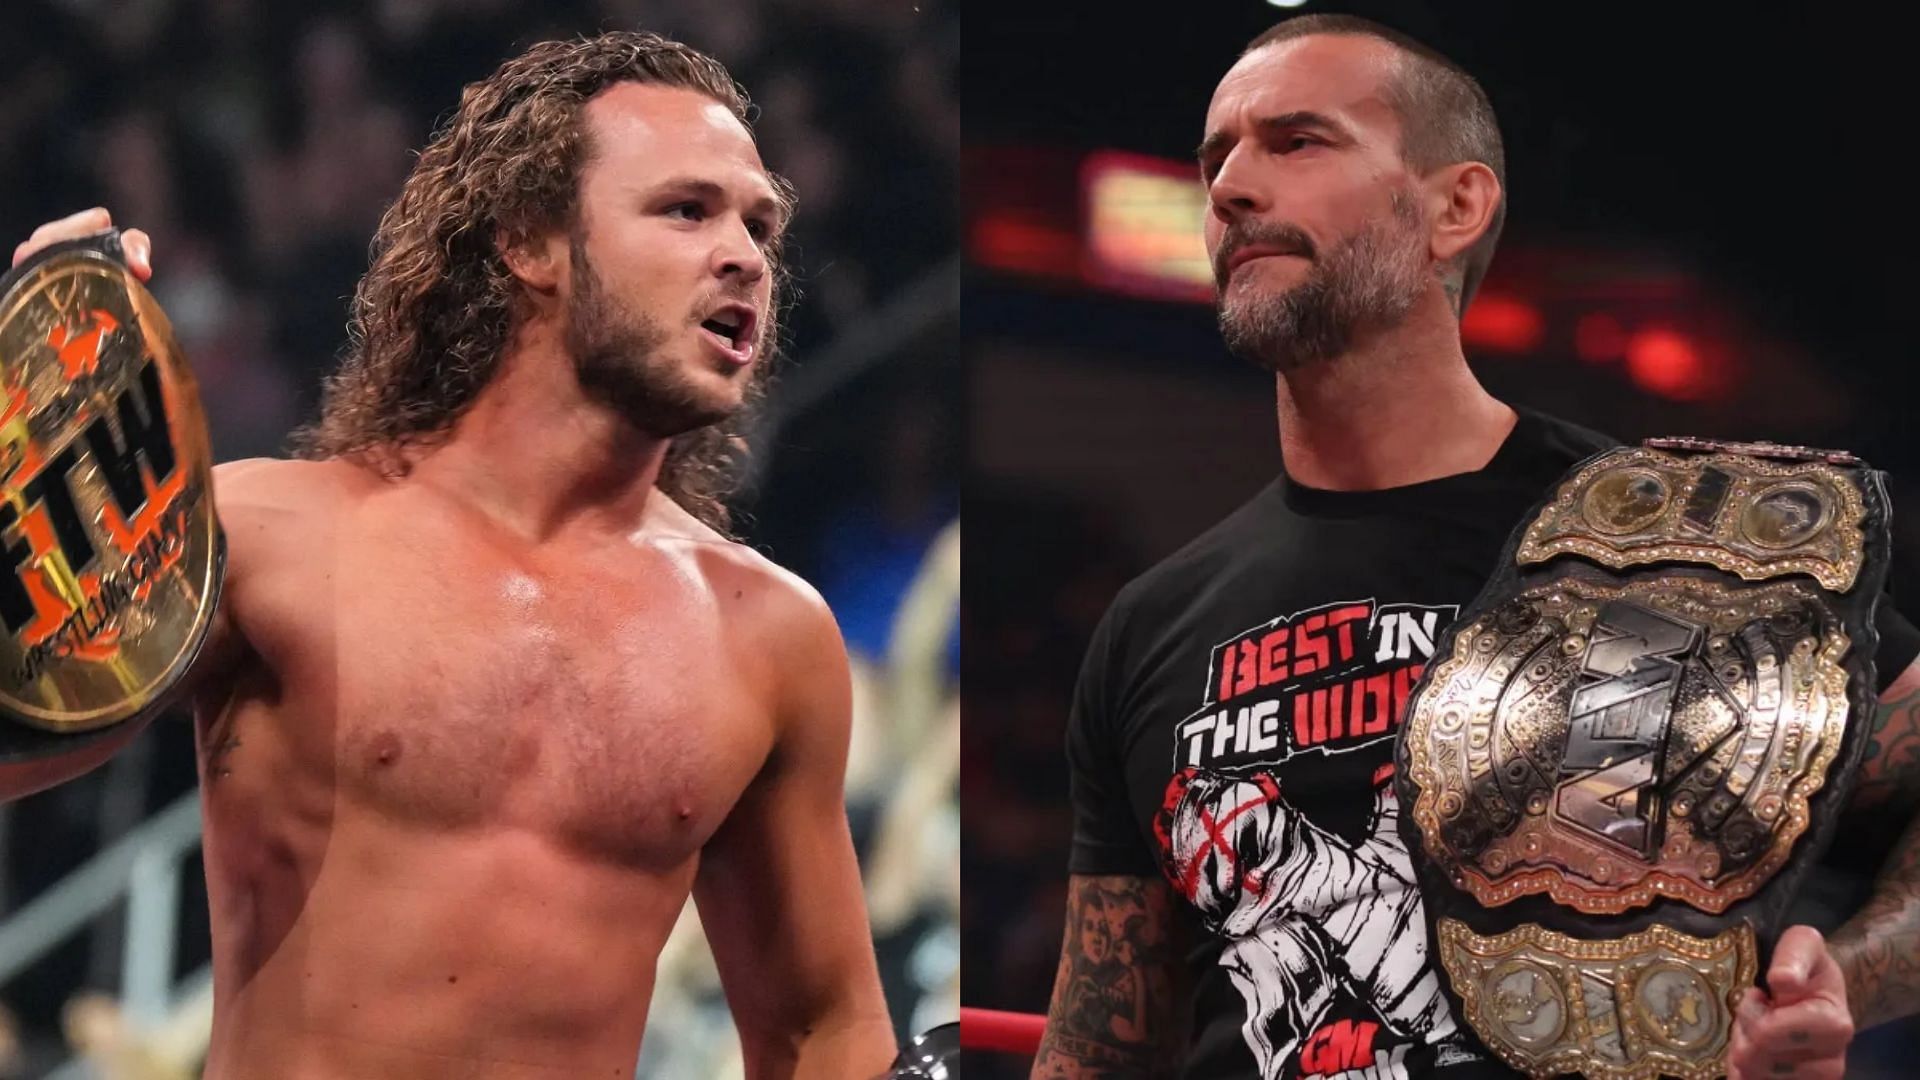 Could Jack Perry and CM Punk